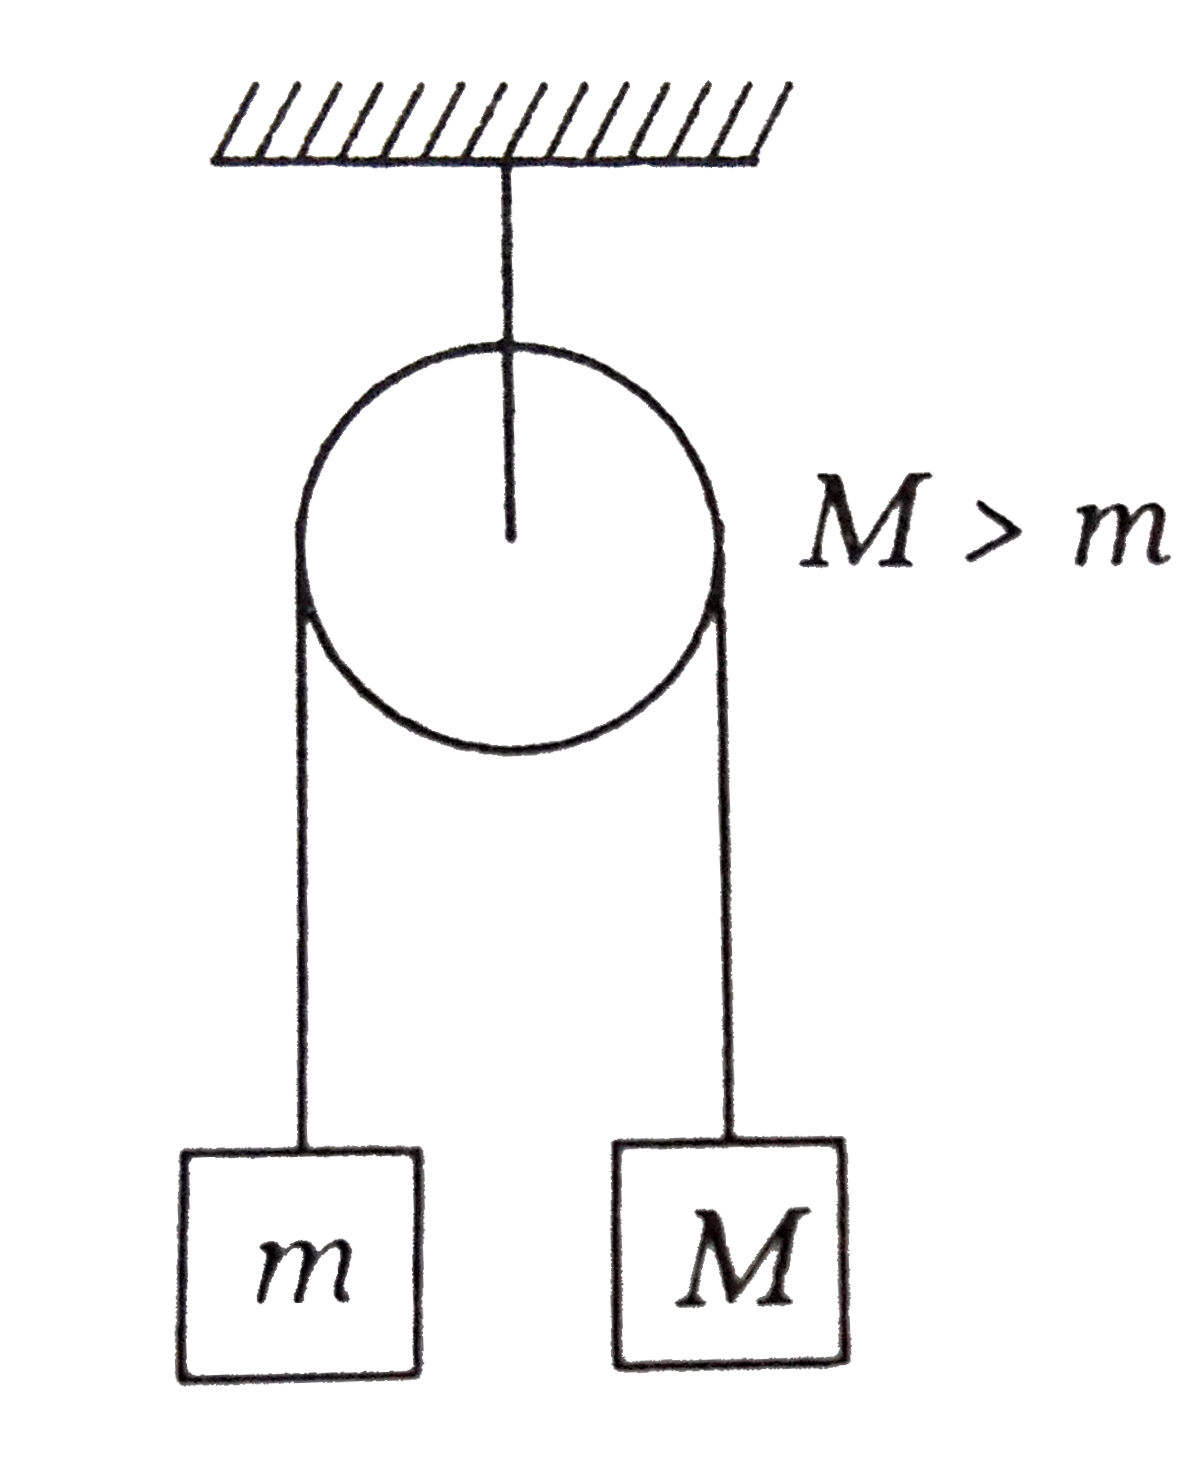 The system shown in the figure is released from rest. At the instant when mass M has fallen through a distance h, the velocity of m will be